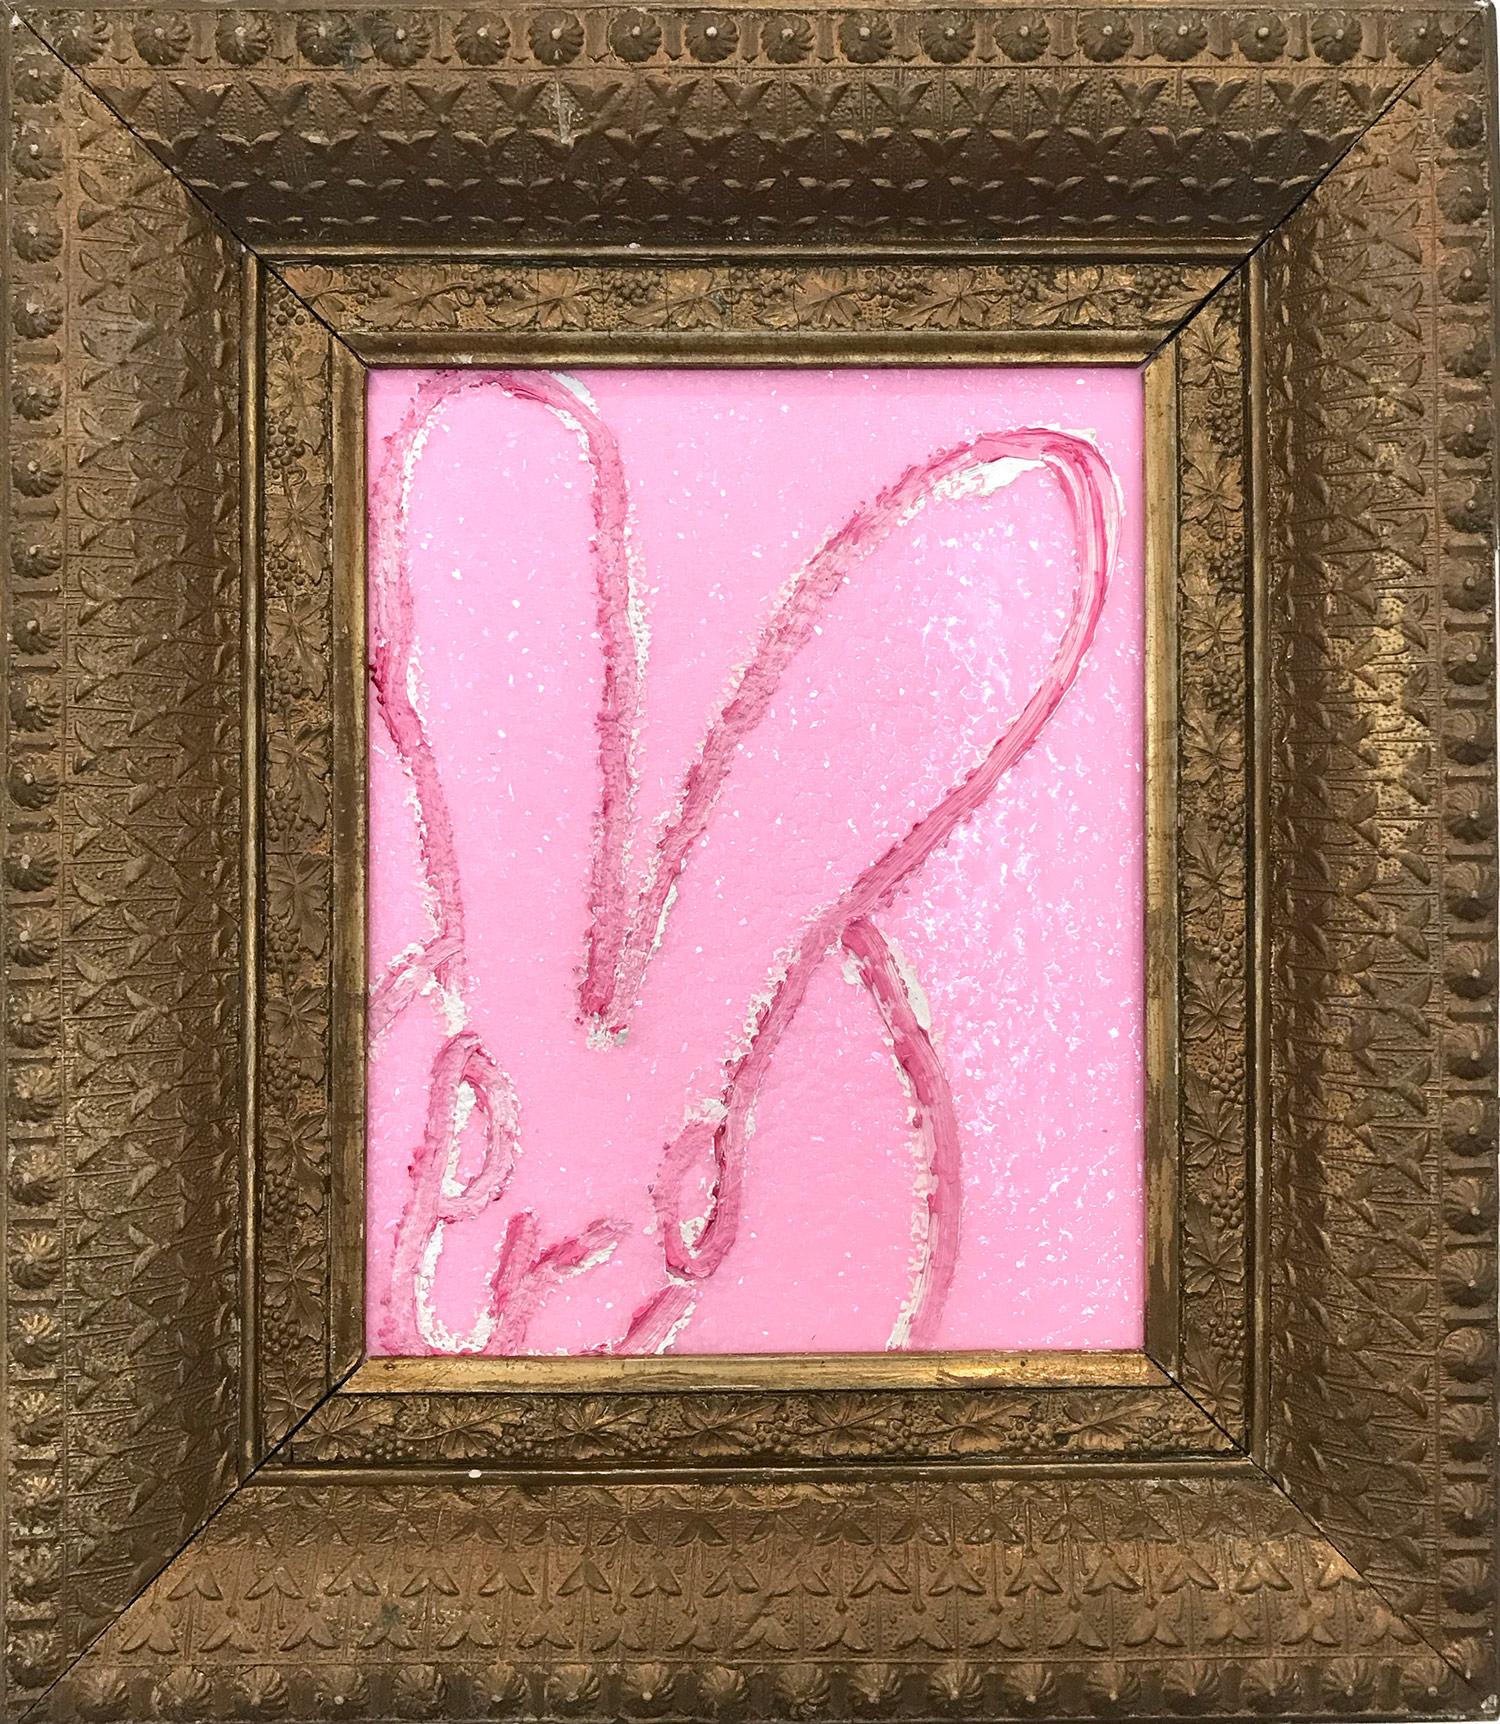 Hunt Slonem Abstract Painting - "Pink Diamond" (Resin and Diamond Dust Bunny on Pink) Oil Painting on Wood Panel